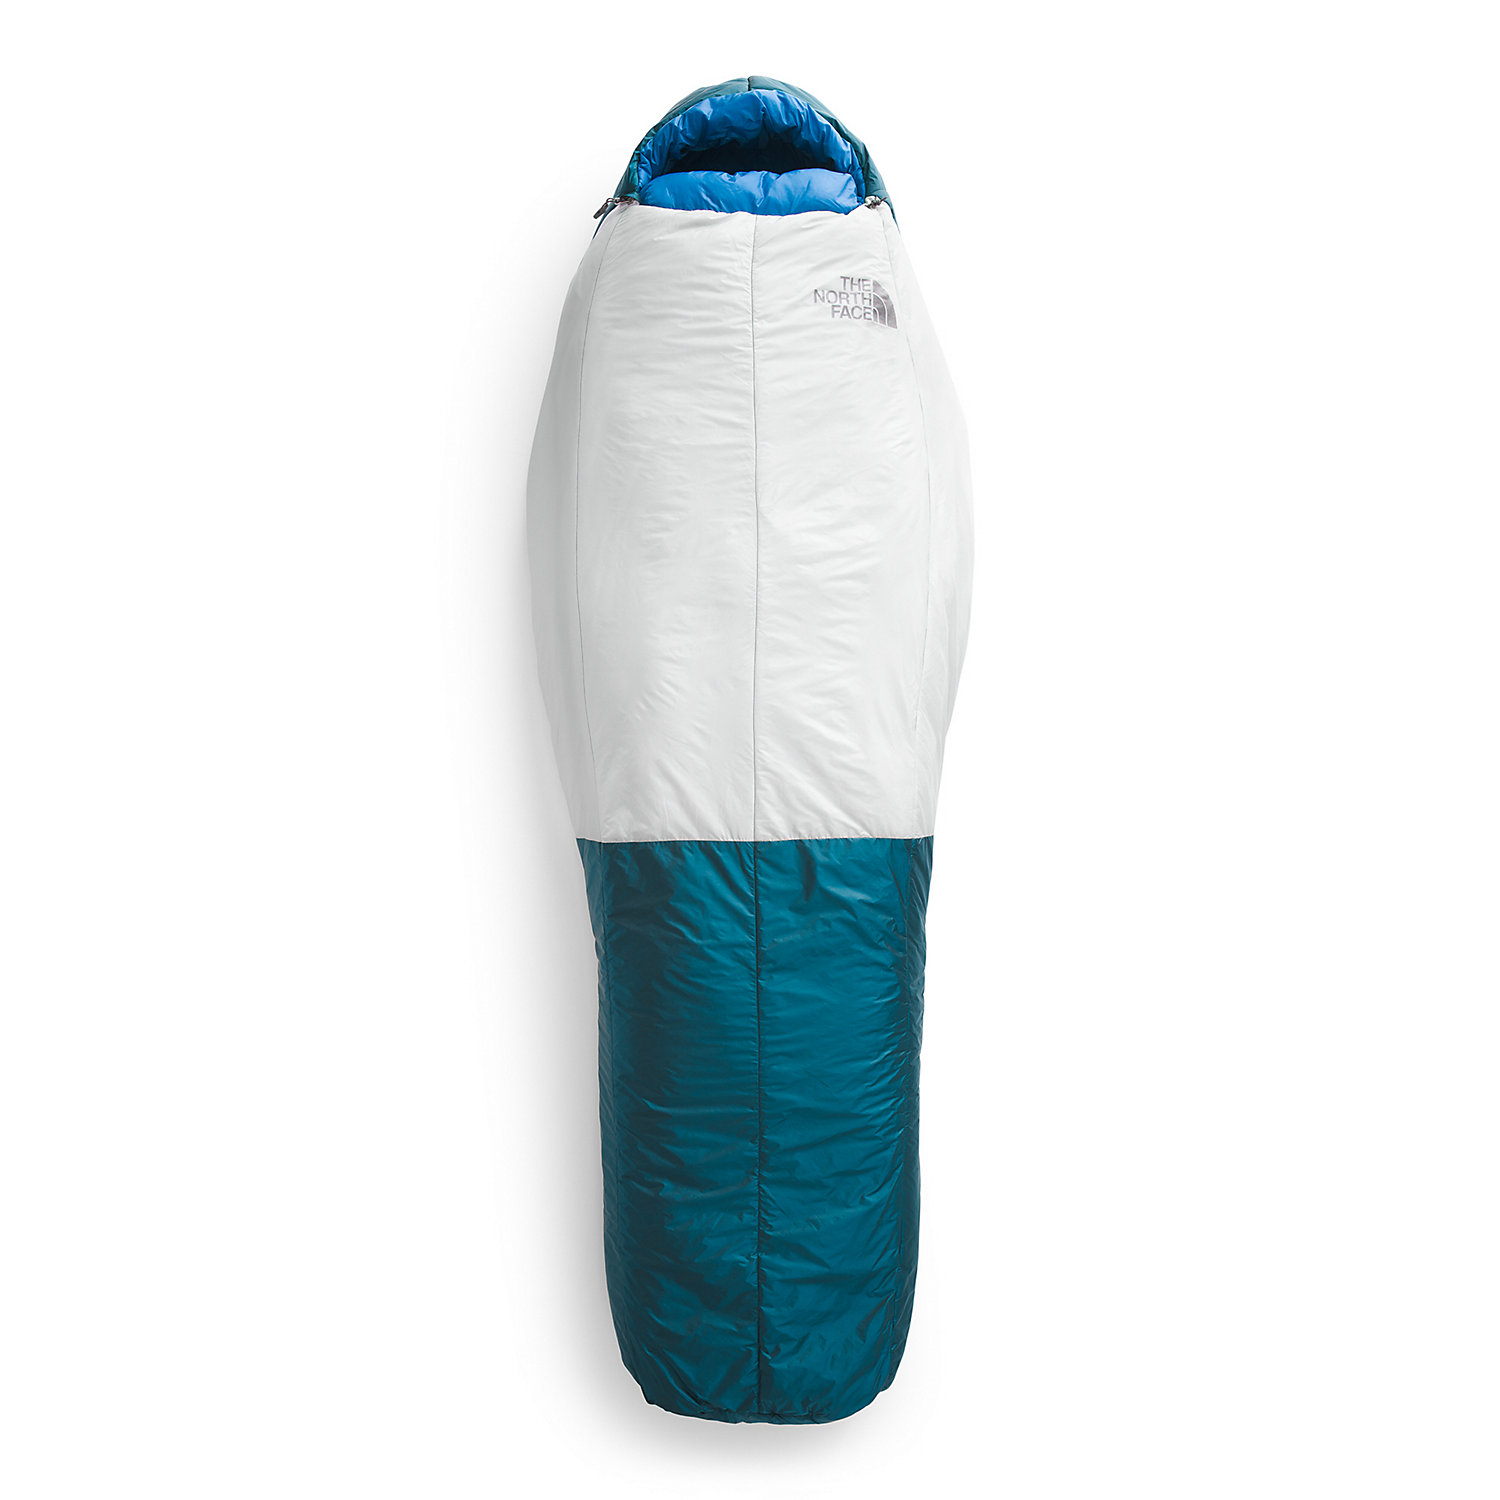 The North Face Cats Meow Eco Sleeping Bag